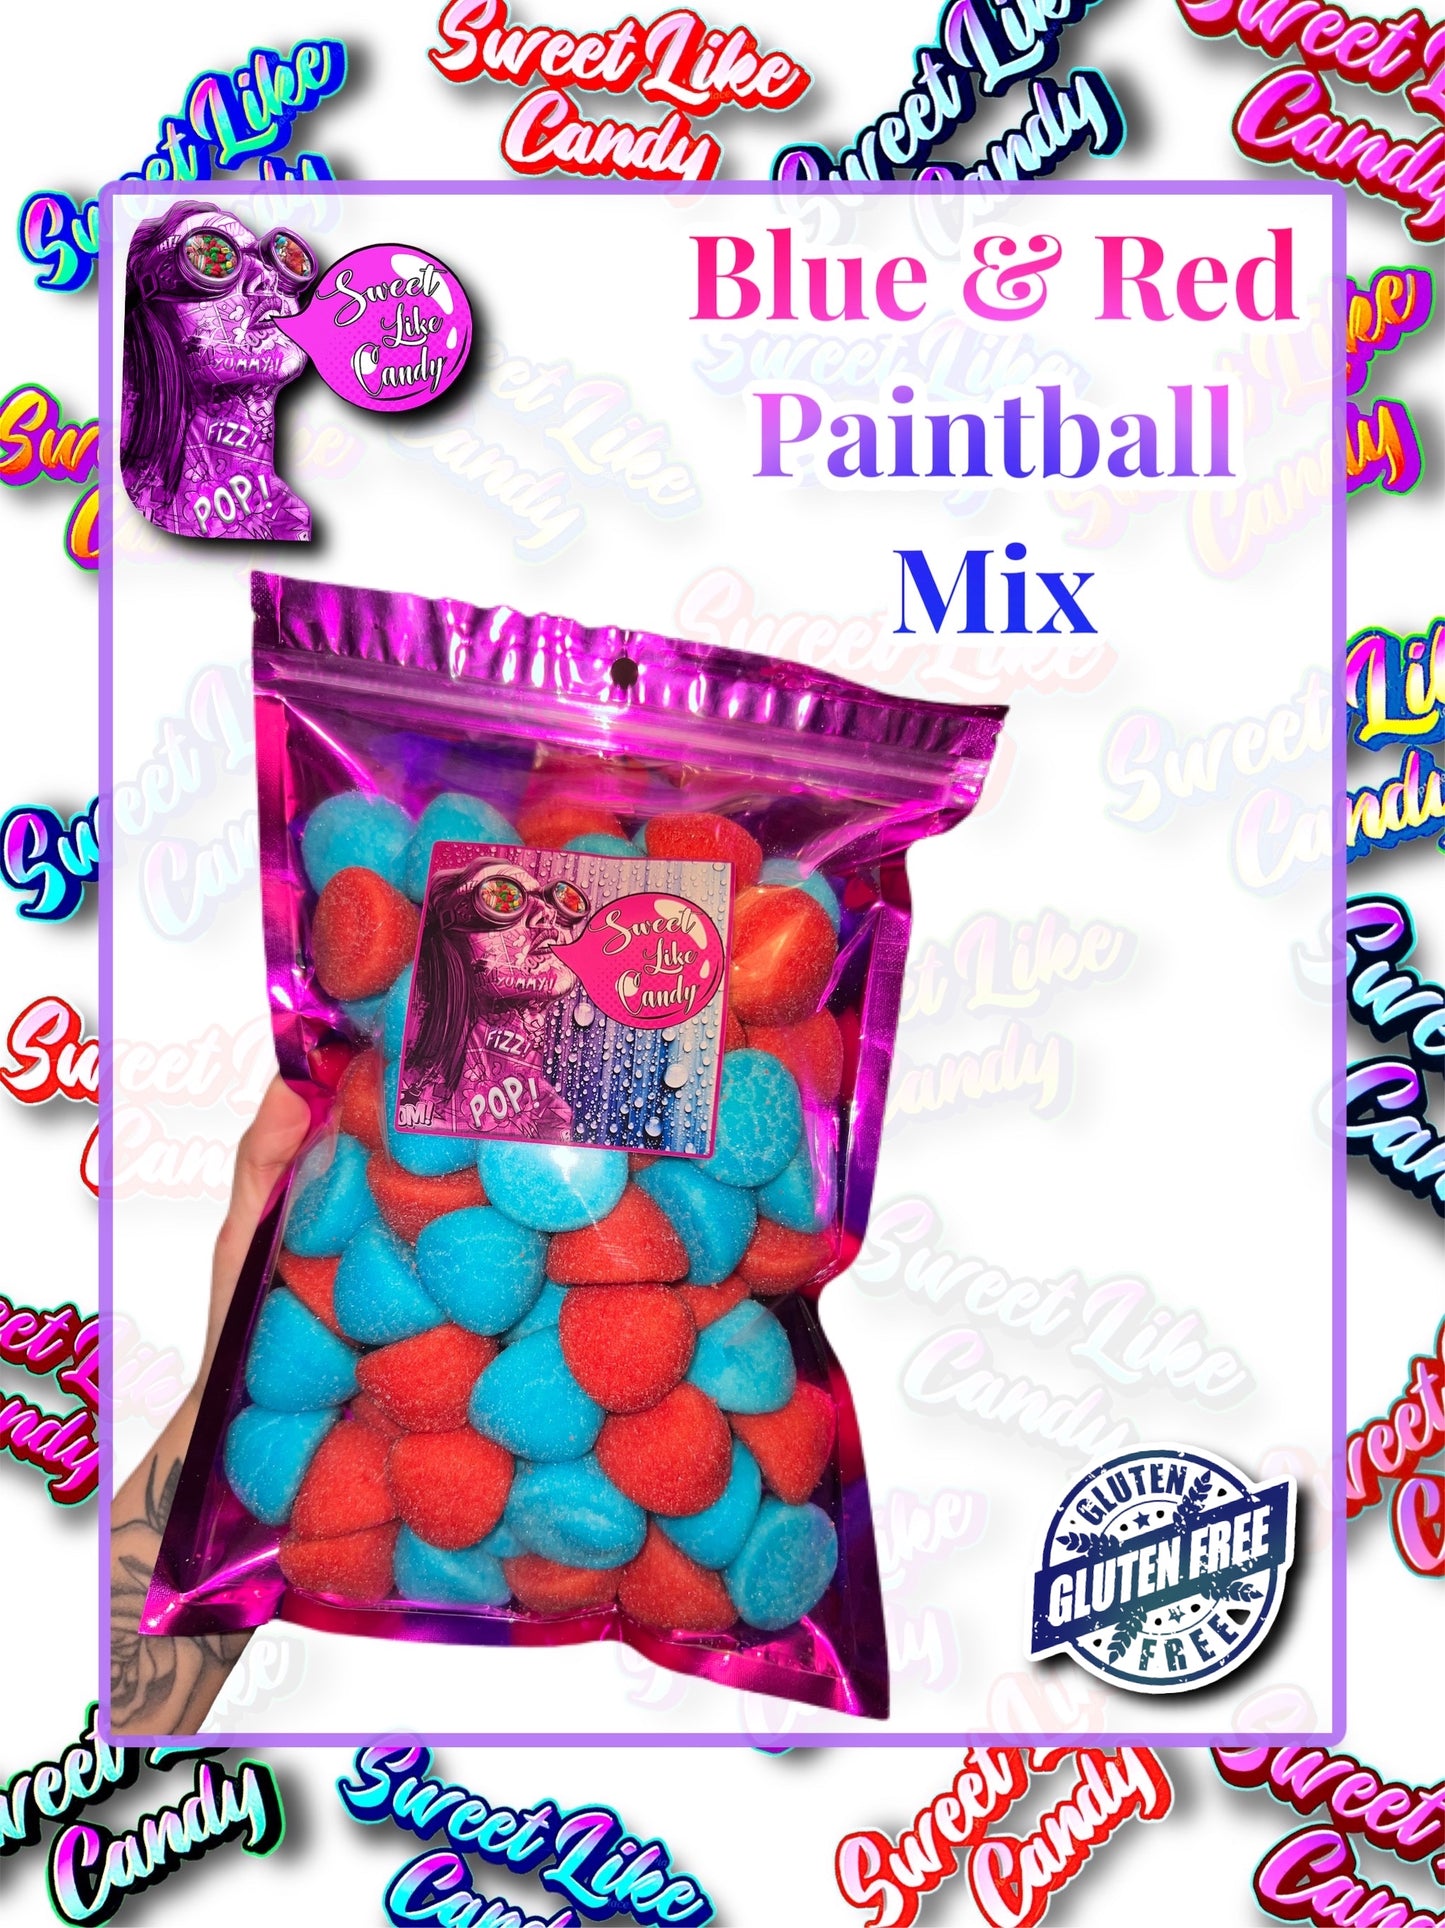 Blue & Red Paintball Mix